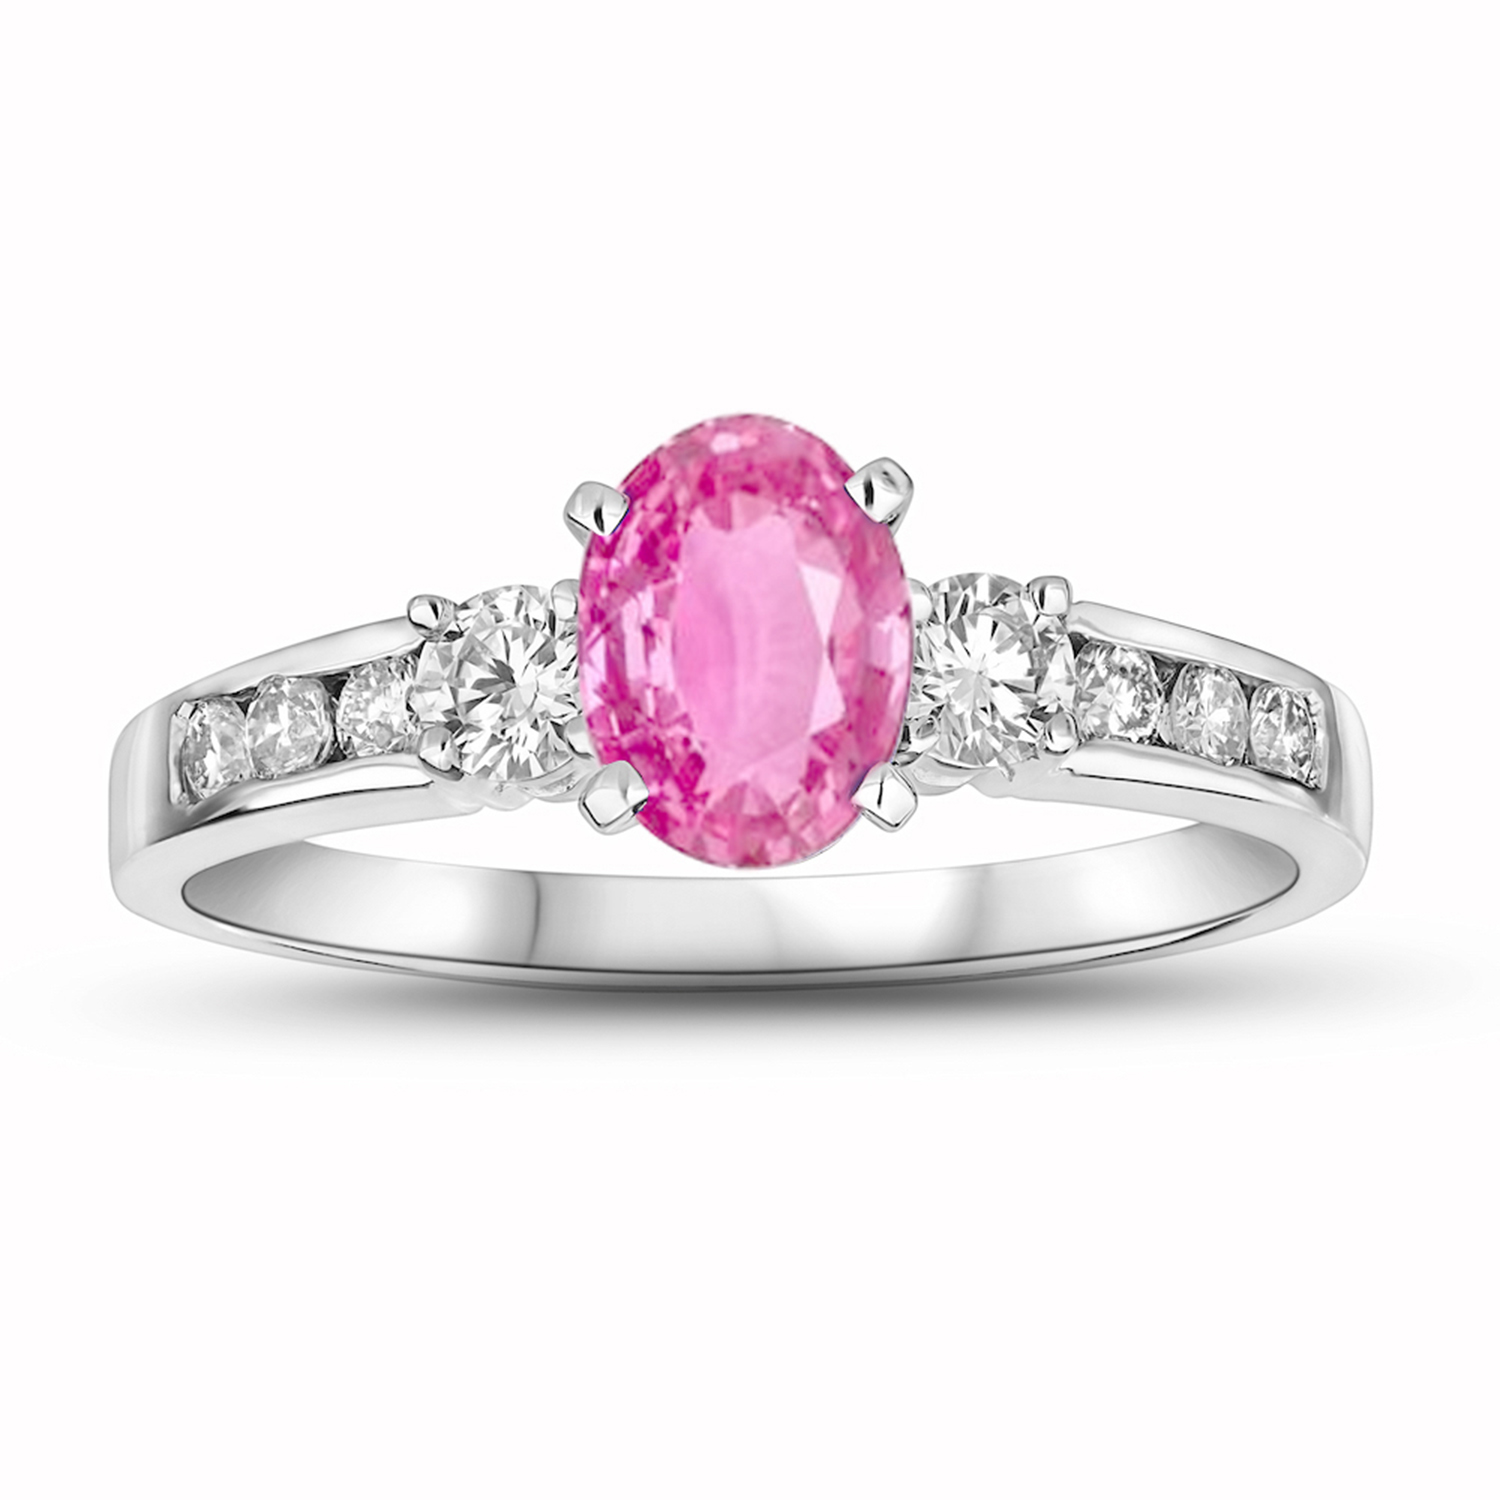 0.40ctw DIamond and Pink Sapphire Engagement Ring in 14k Gold